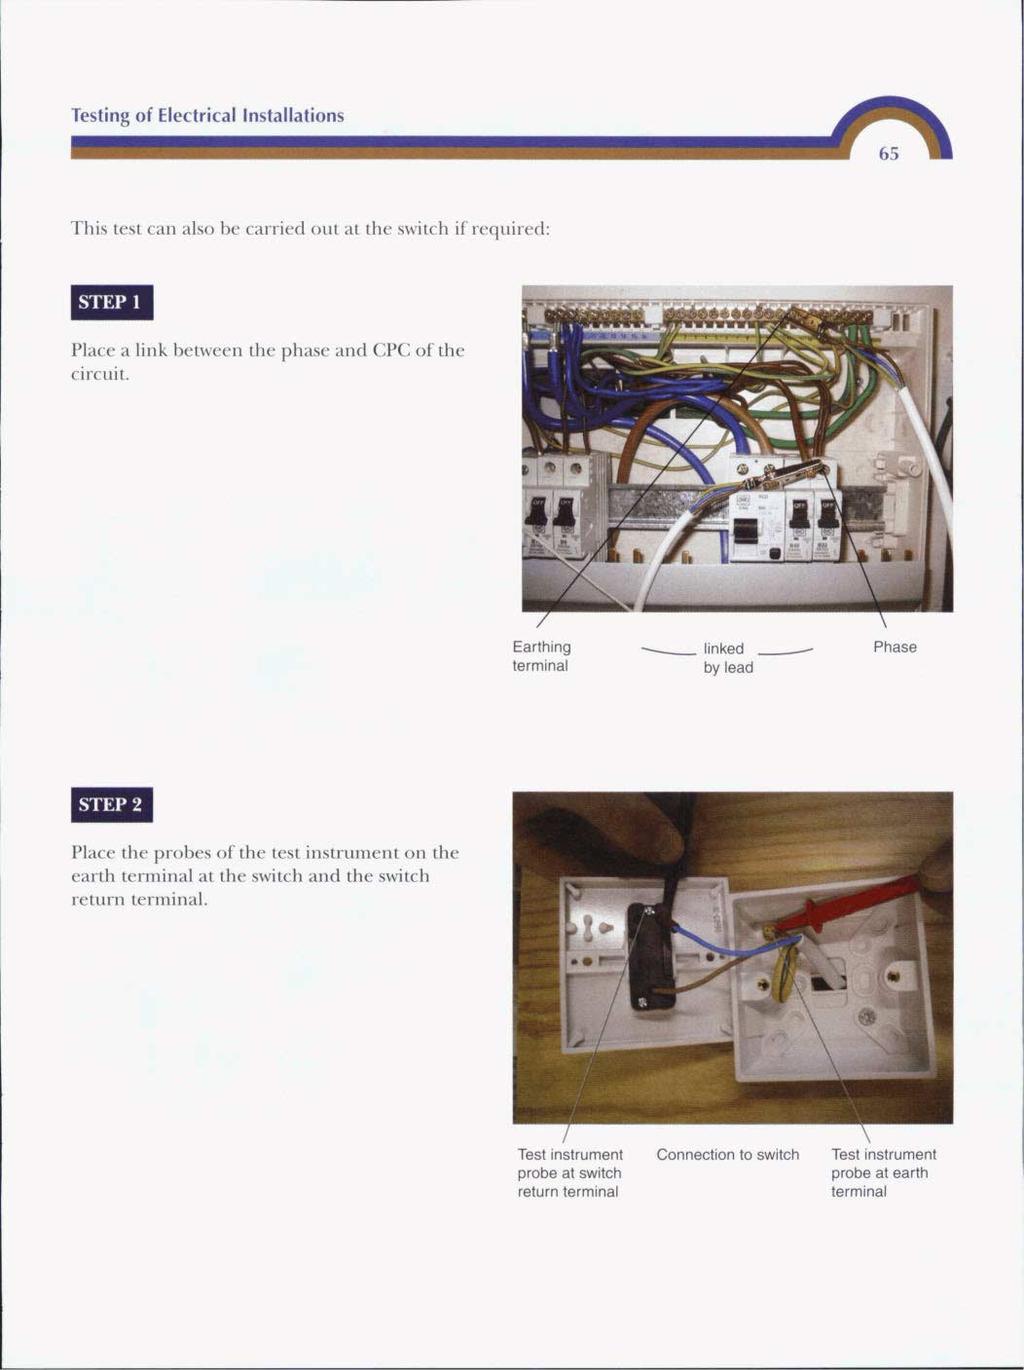 Testing of Electrical Installations This test can also be carried out at the switch if required: Place a link between the phase and CPC of the circuit.